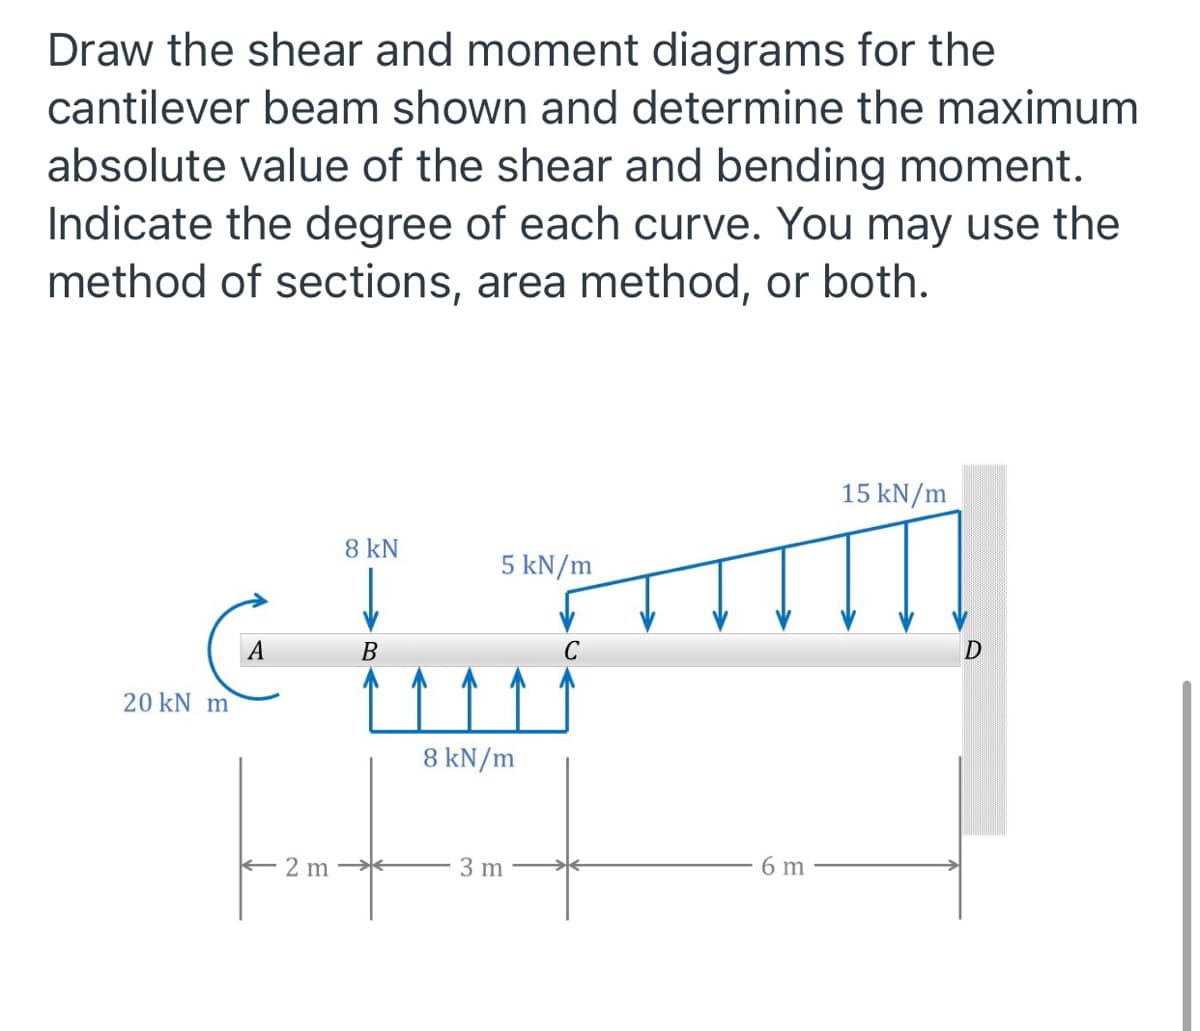 Draw the shear and moment diagrams for the
cantilever beam shown and determine the maximum
absolute value of the shear and bending moment.
Indicate the degree of each curve. You may use the
method of sections, area method, or both.
15 kN/m
8 kN
5 kN/m
A
В
C
D
20 kN m
8 kN/m
E 2 m →
3 m
6 m
